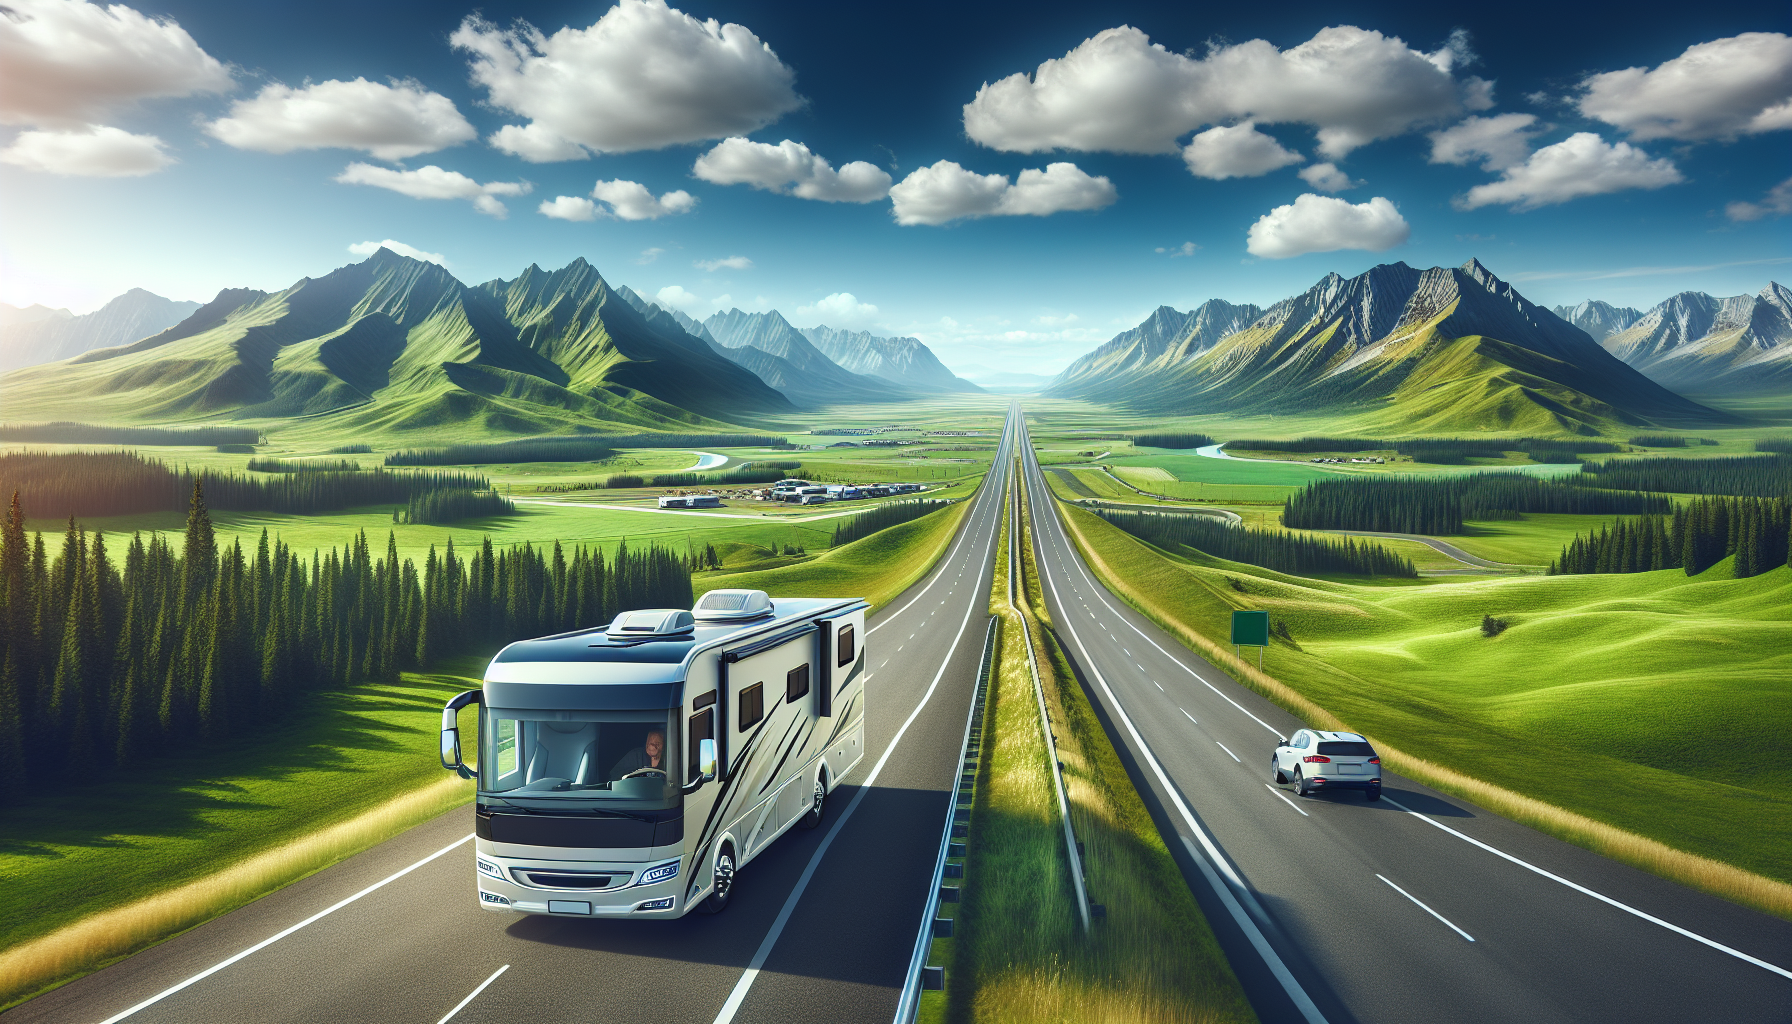 Check Out the Best Used Motorhomes in Ocala and Tampa